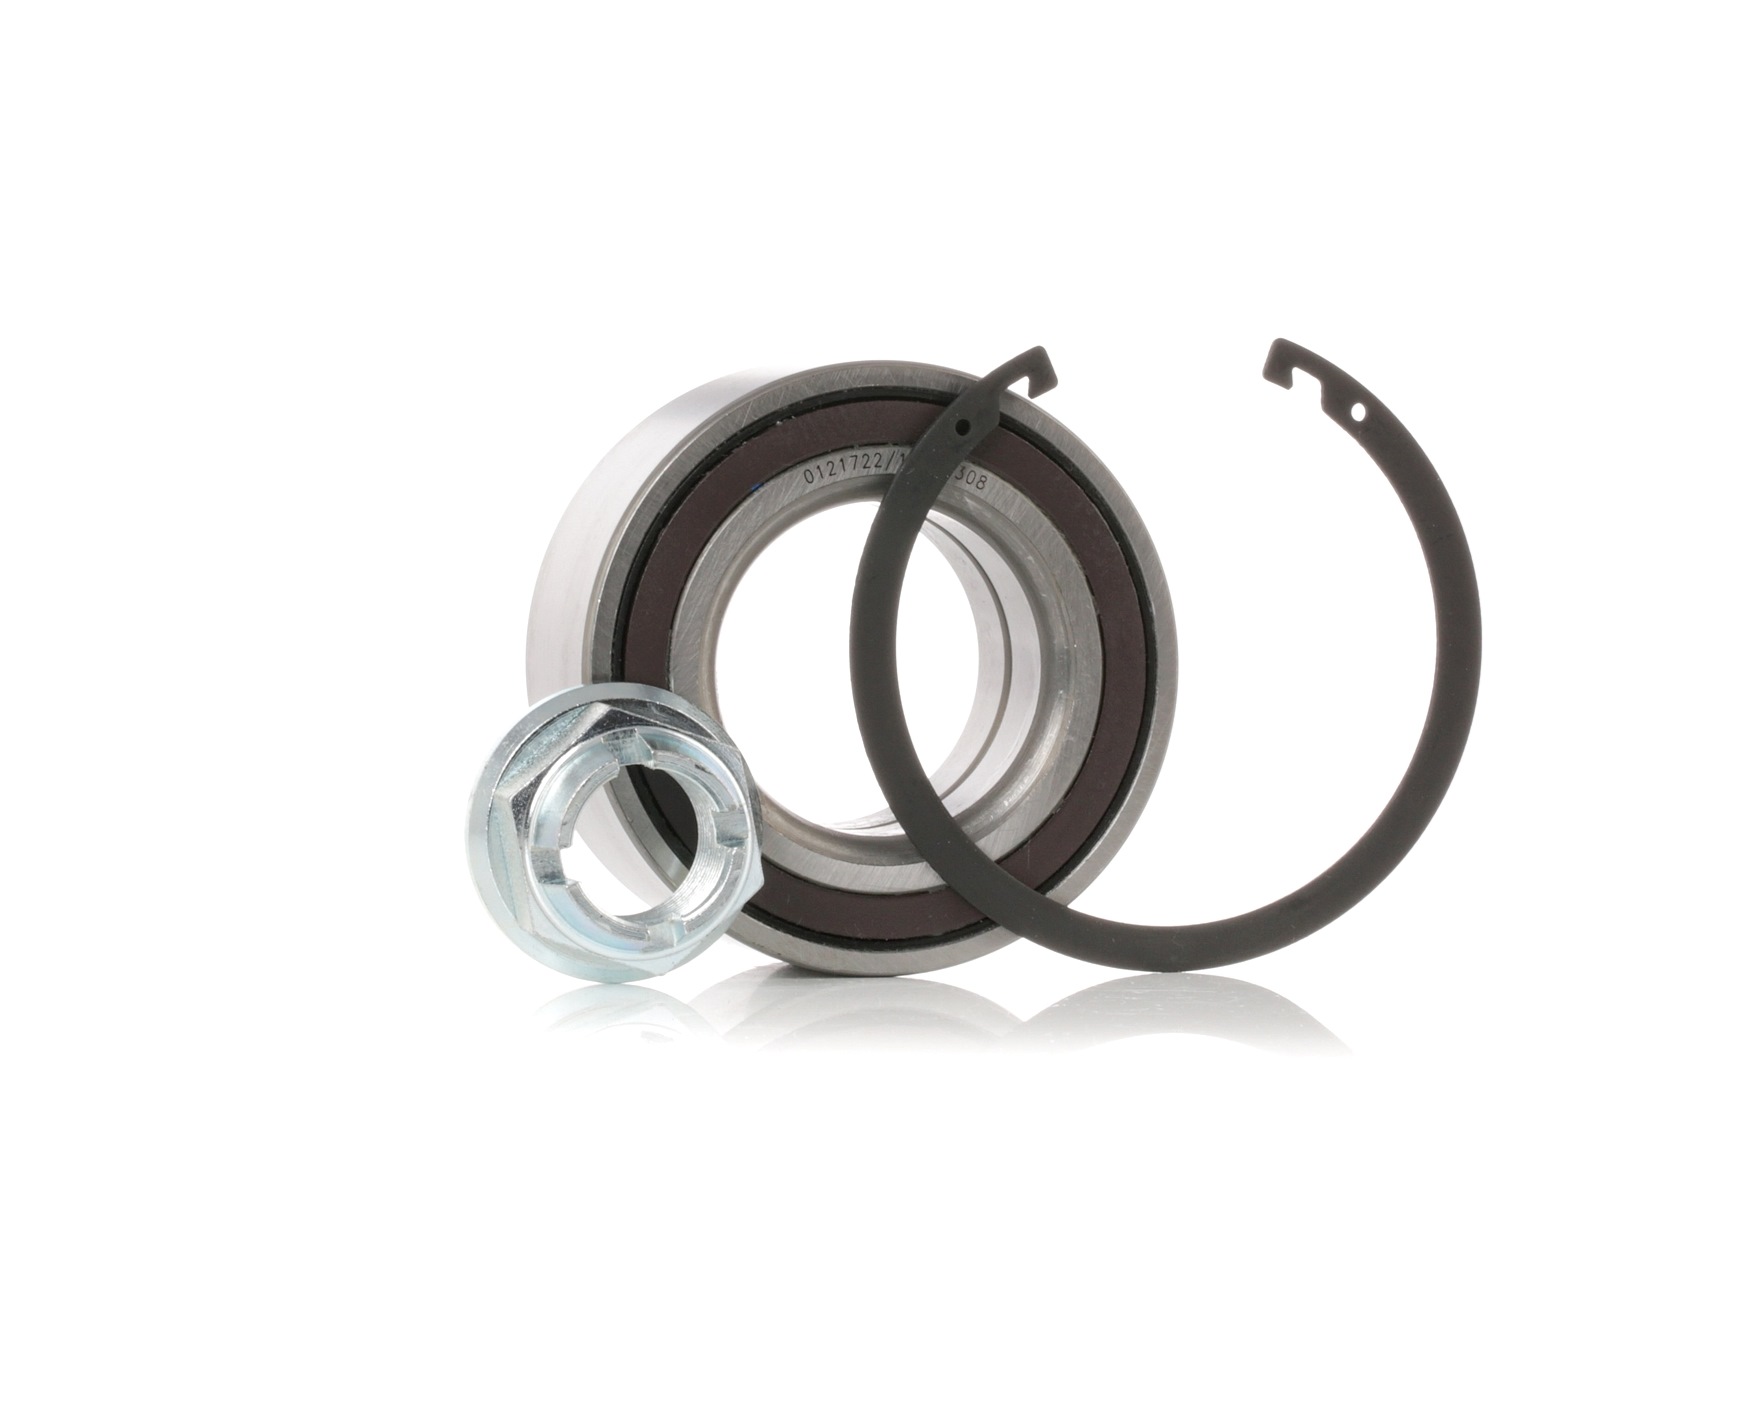 STARK SKWB-0180925 Wheel bearing kit Front axle both sides, with integrated magnetic sensor ring, 83 mm